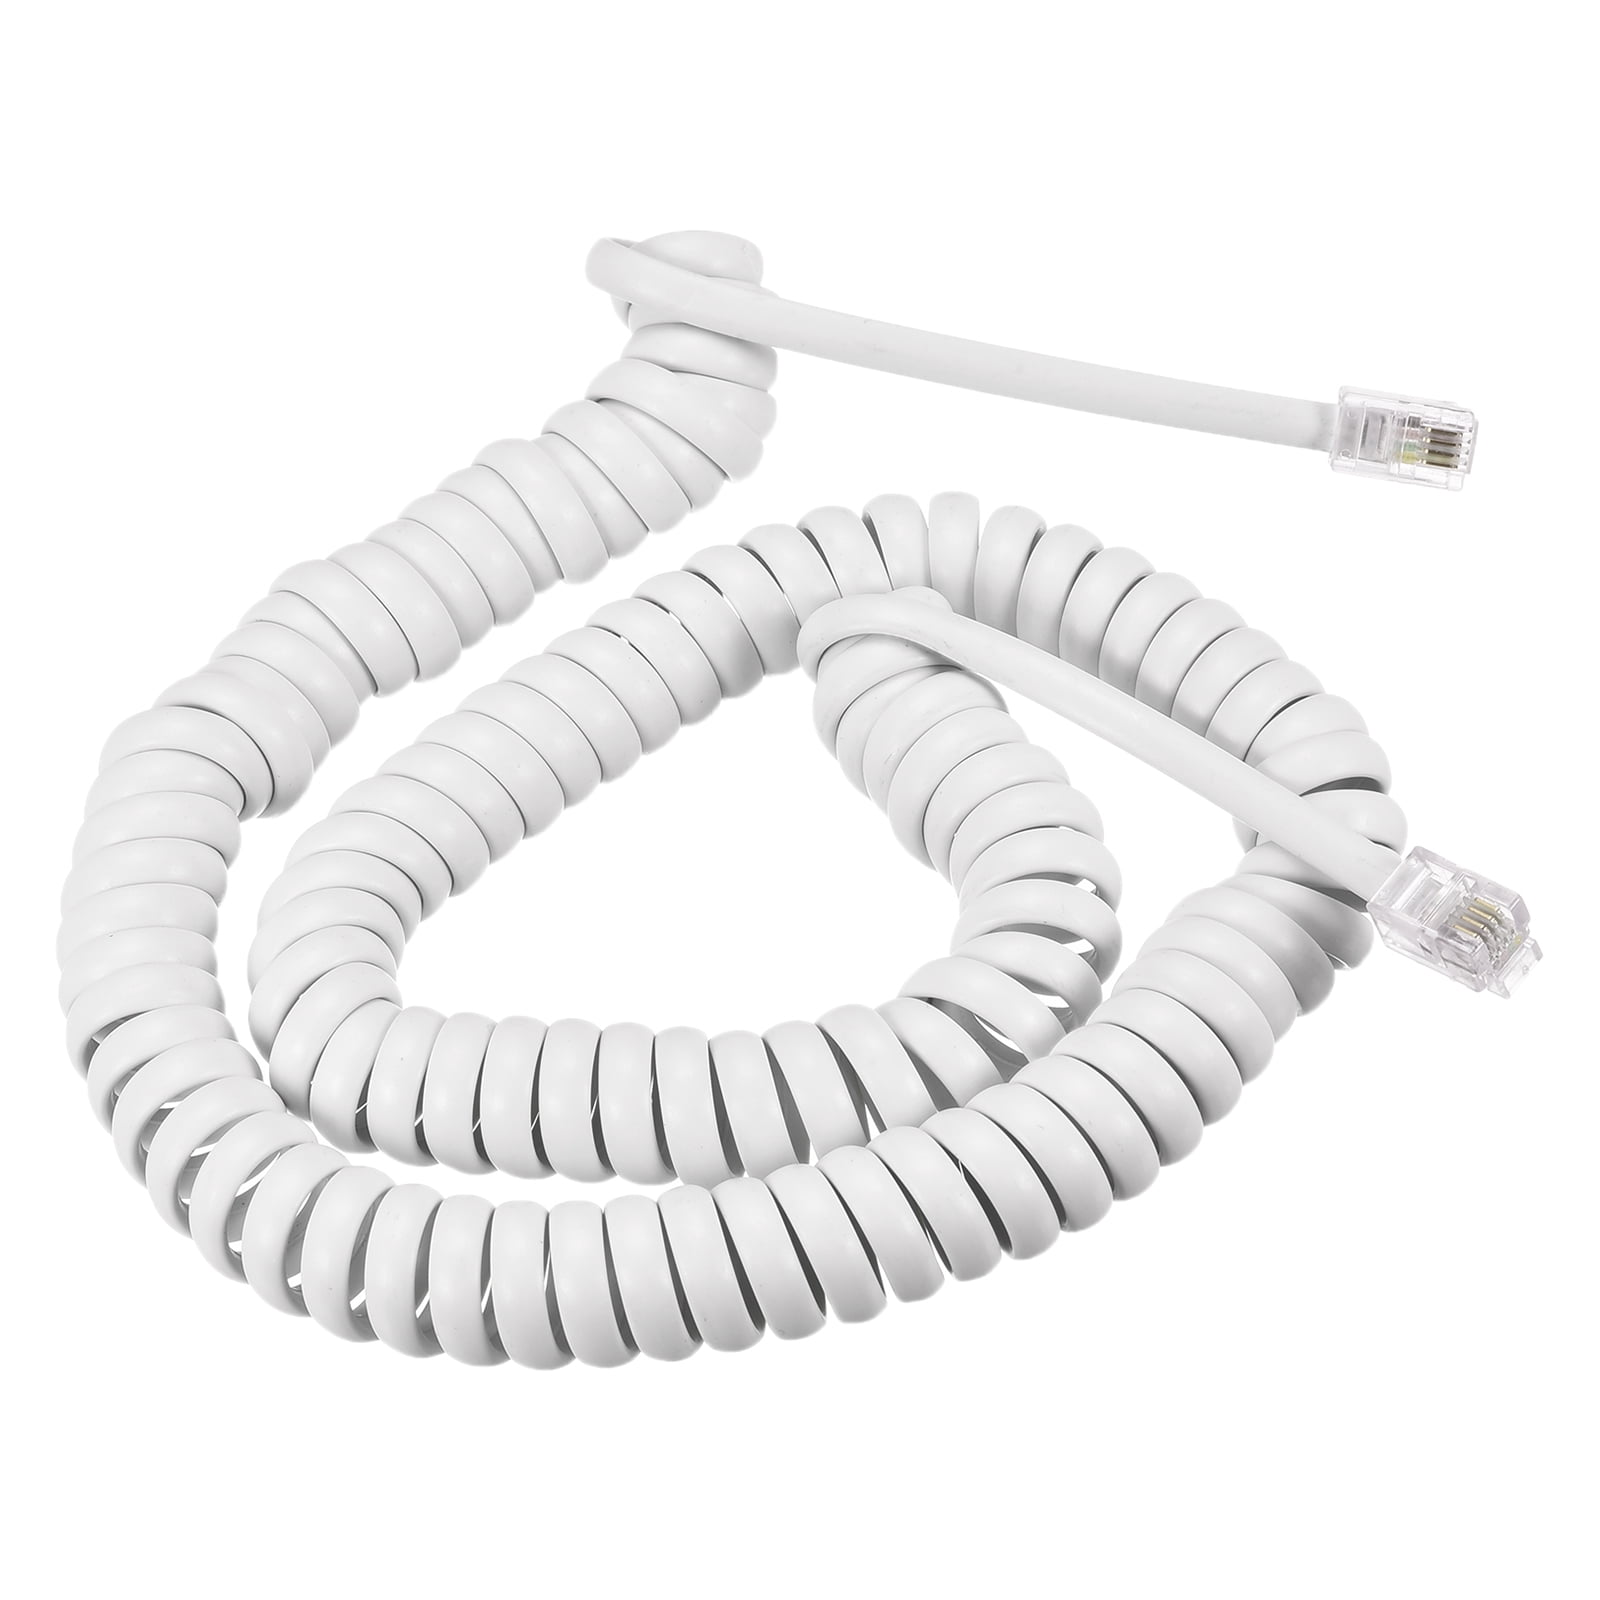 Telephone Handset Coiled Cable 6 ft ASH FREE SHIPPING Handset Cord 